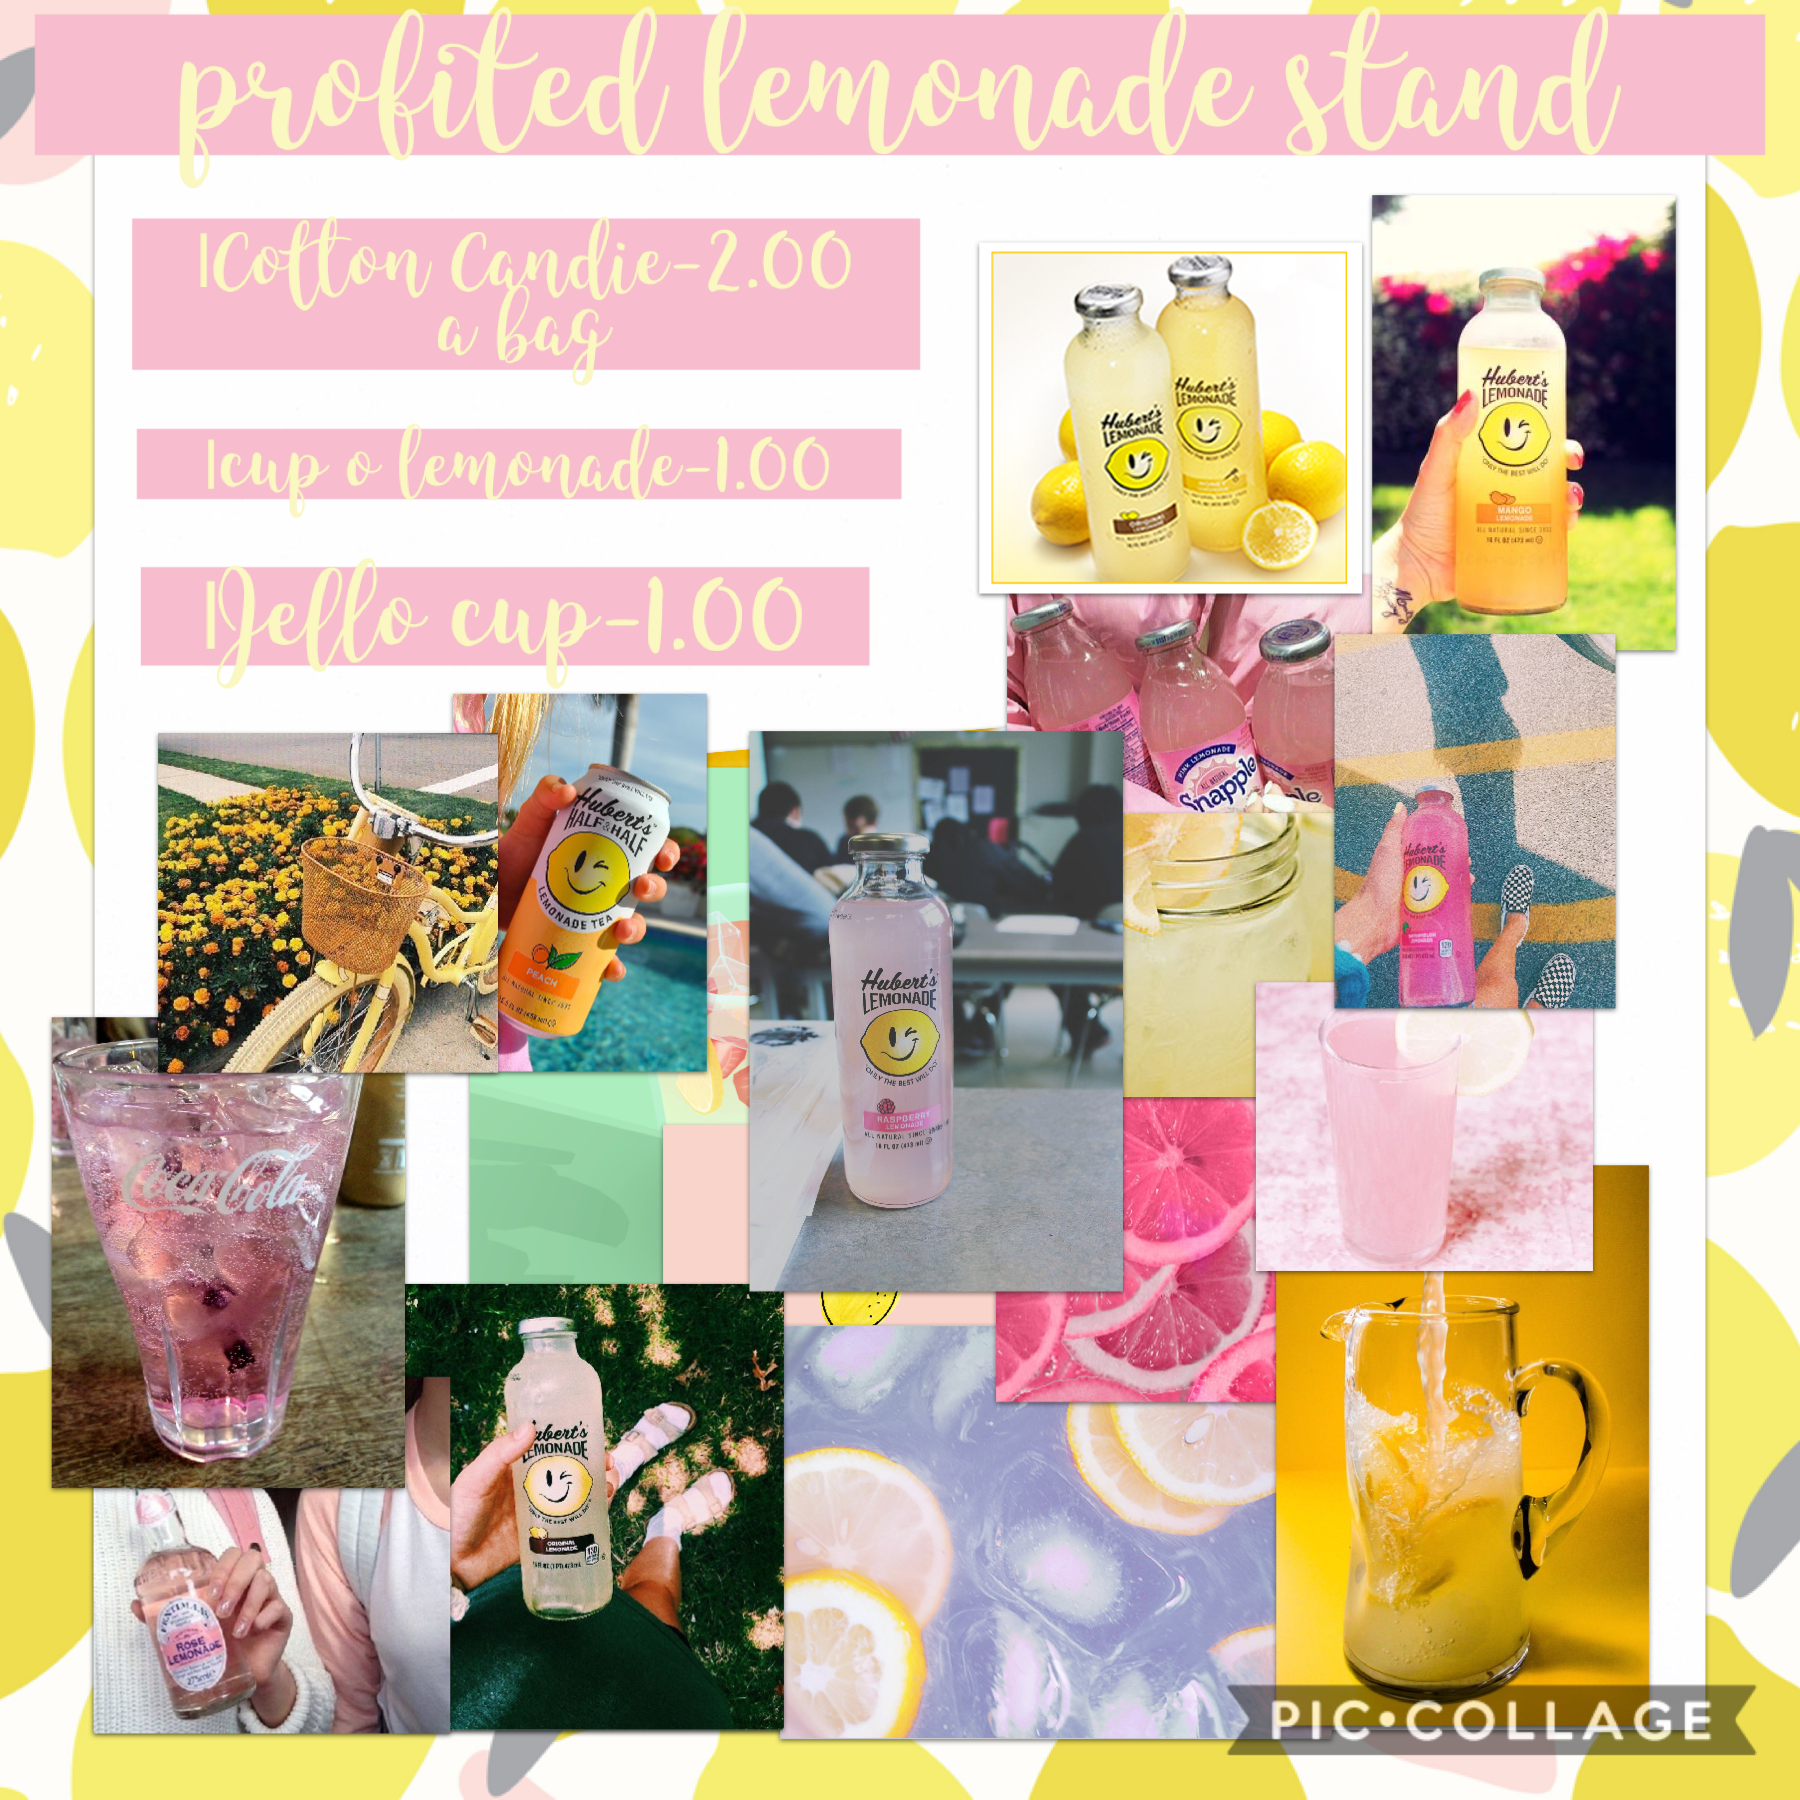 fun profitable lemonade stand print outs! your welcome! ❤️💖🧊